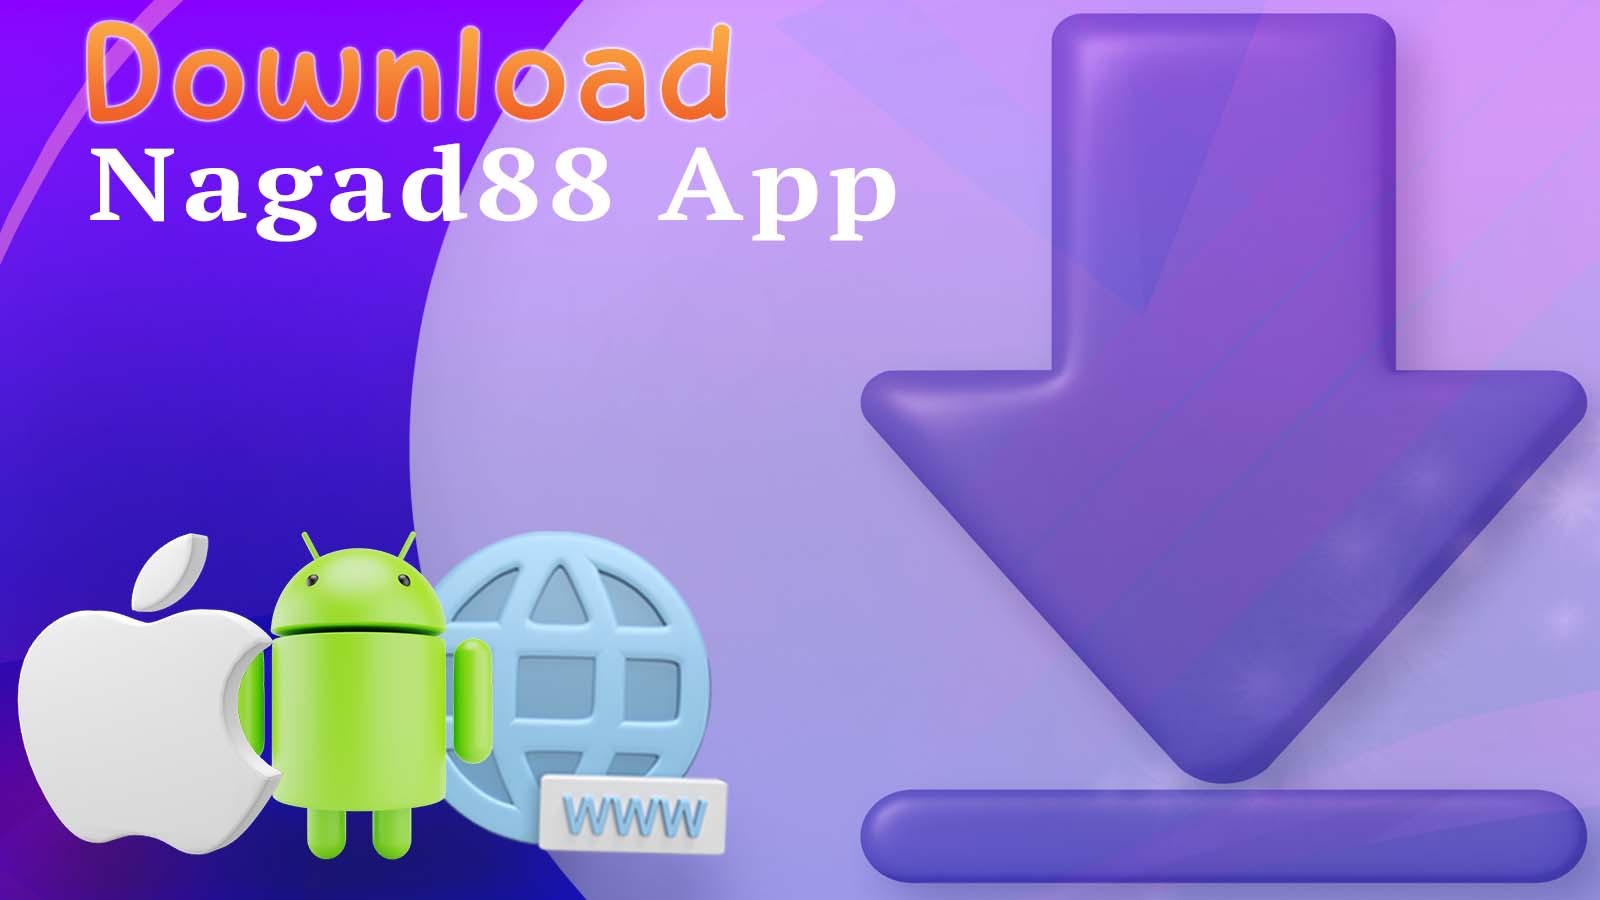 Everyone can Nagad88 apps download free from the official website